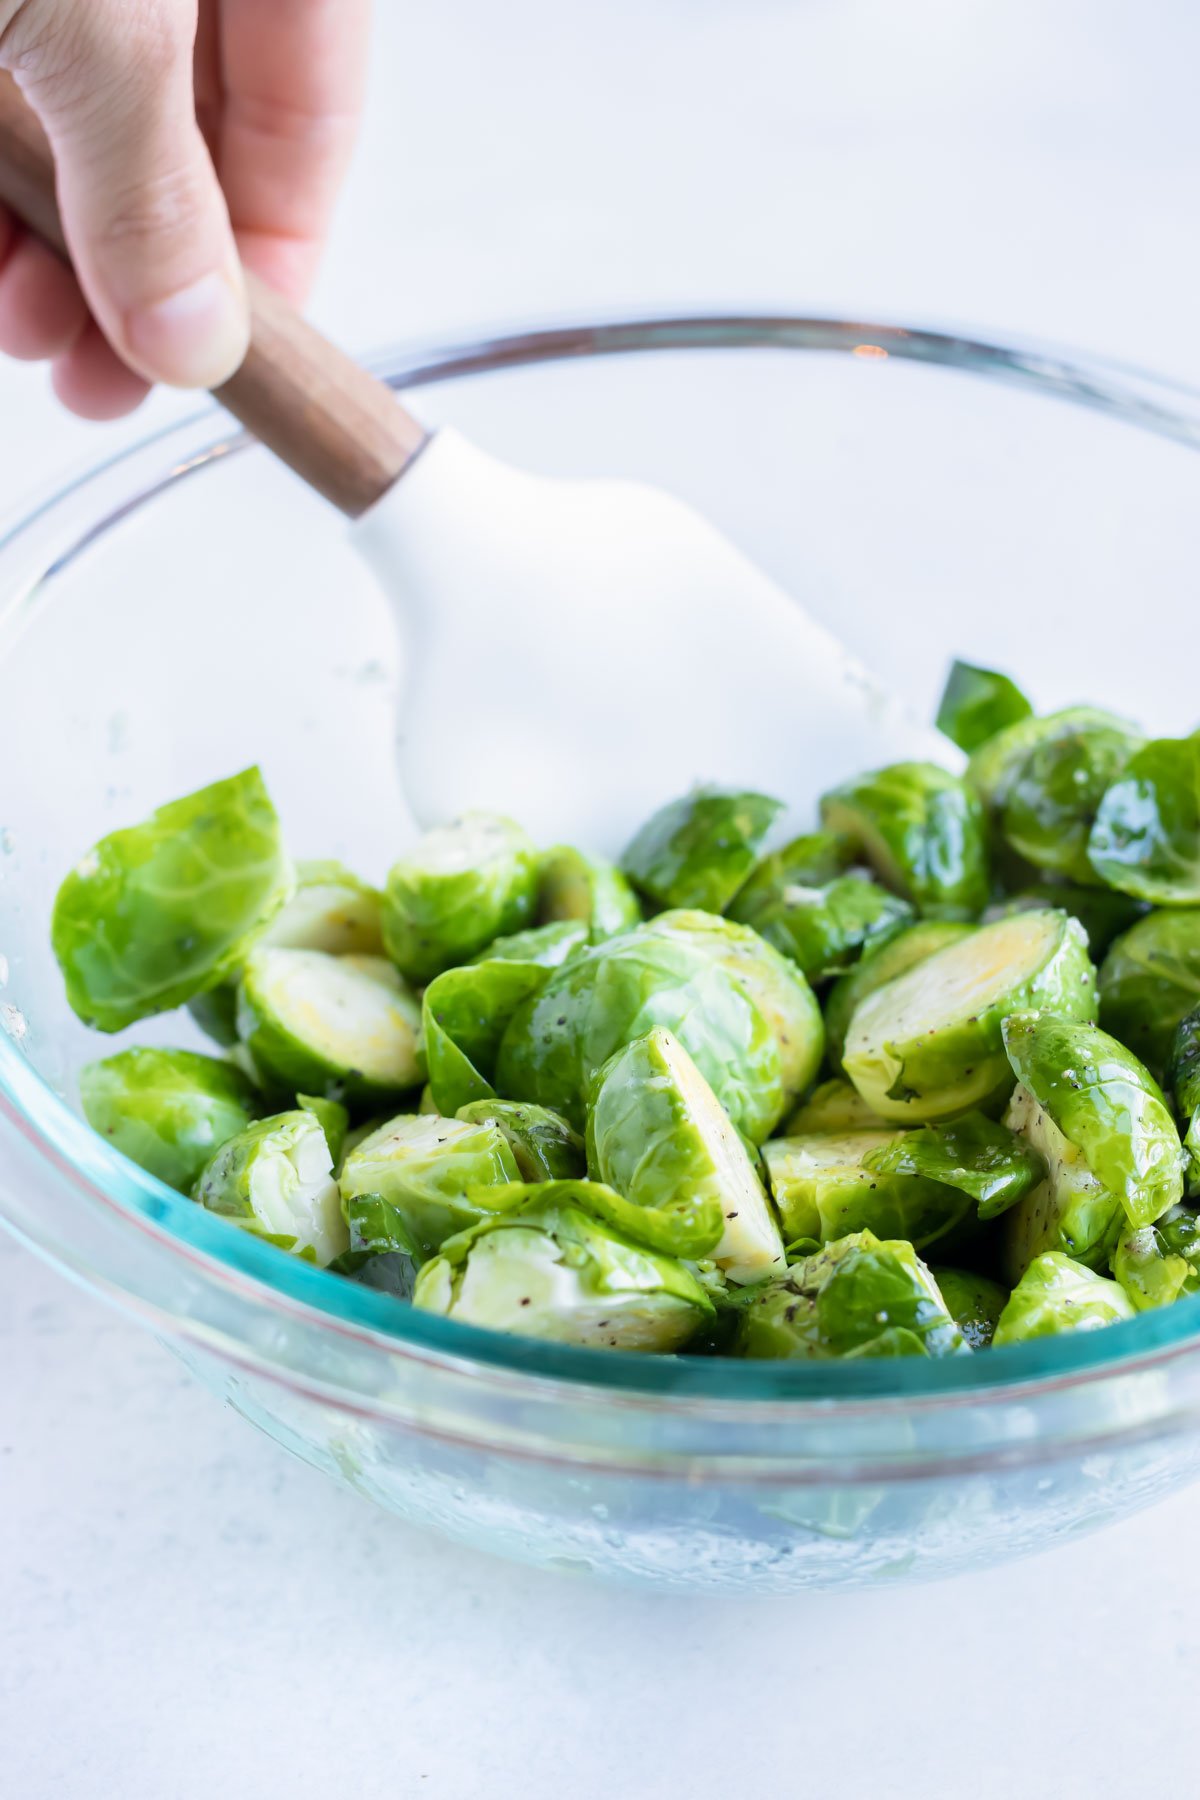 Chopped brussels sprouts are coated with oil mixture in a glass bowl.